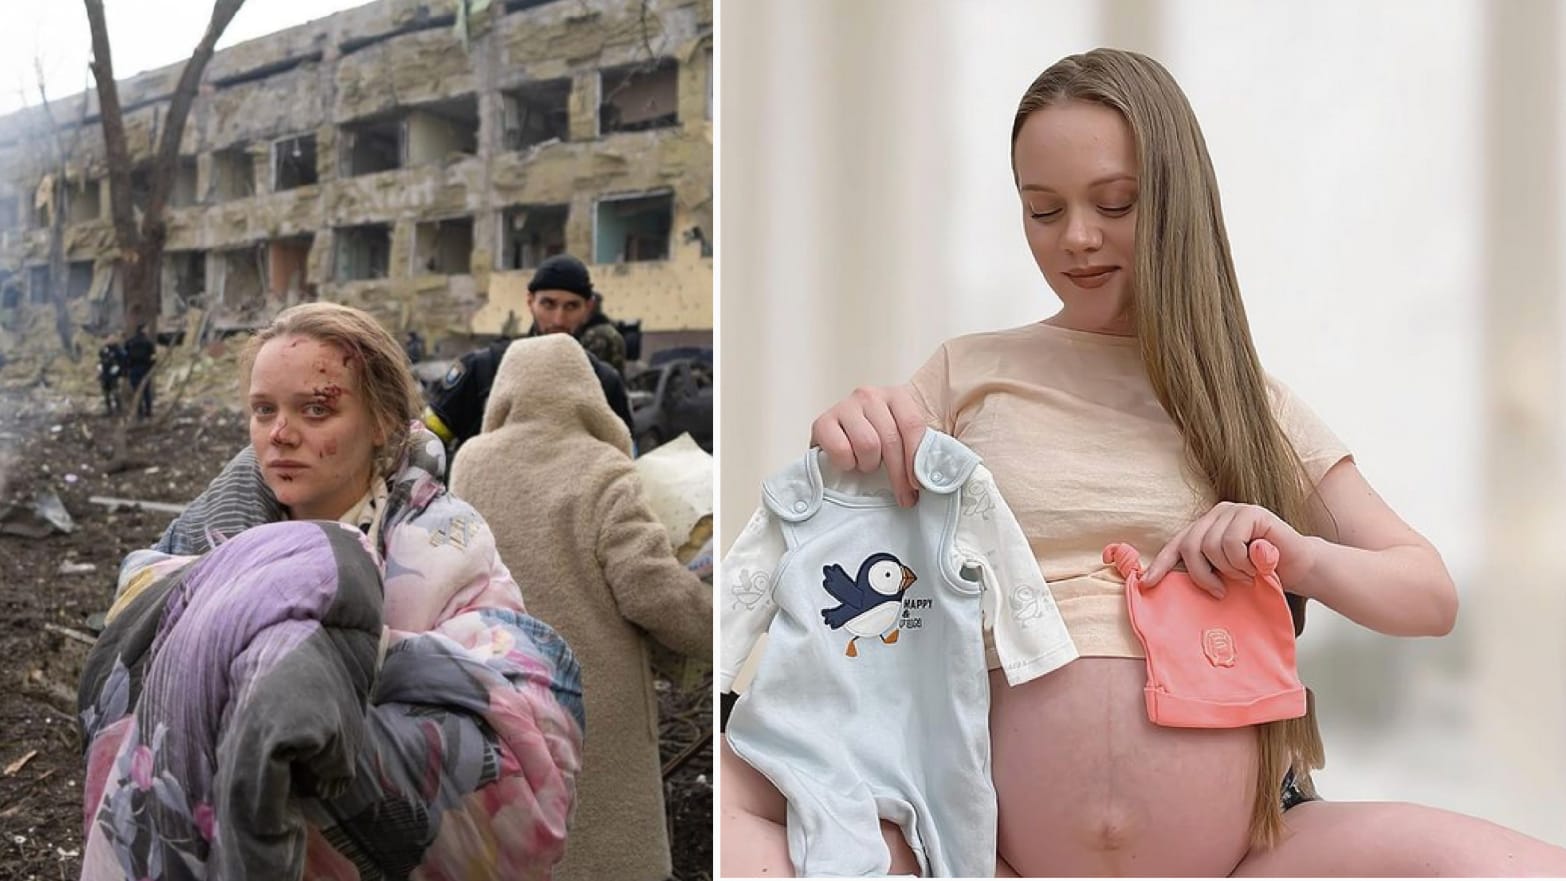 Russia Says Injured Pregnant Woman Is A Crisis Actor Shes Actually A